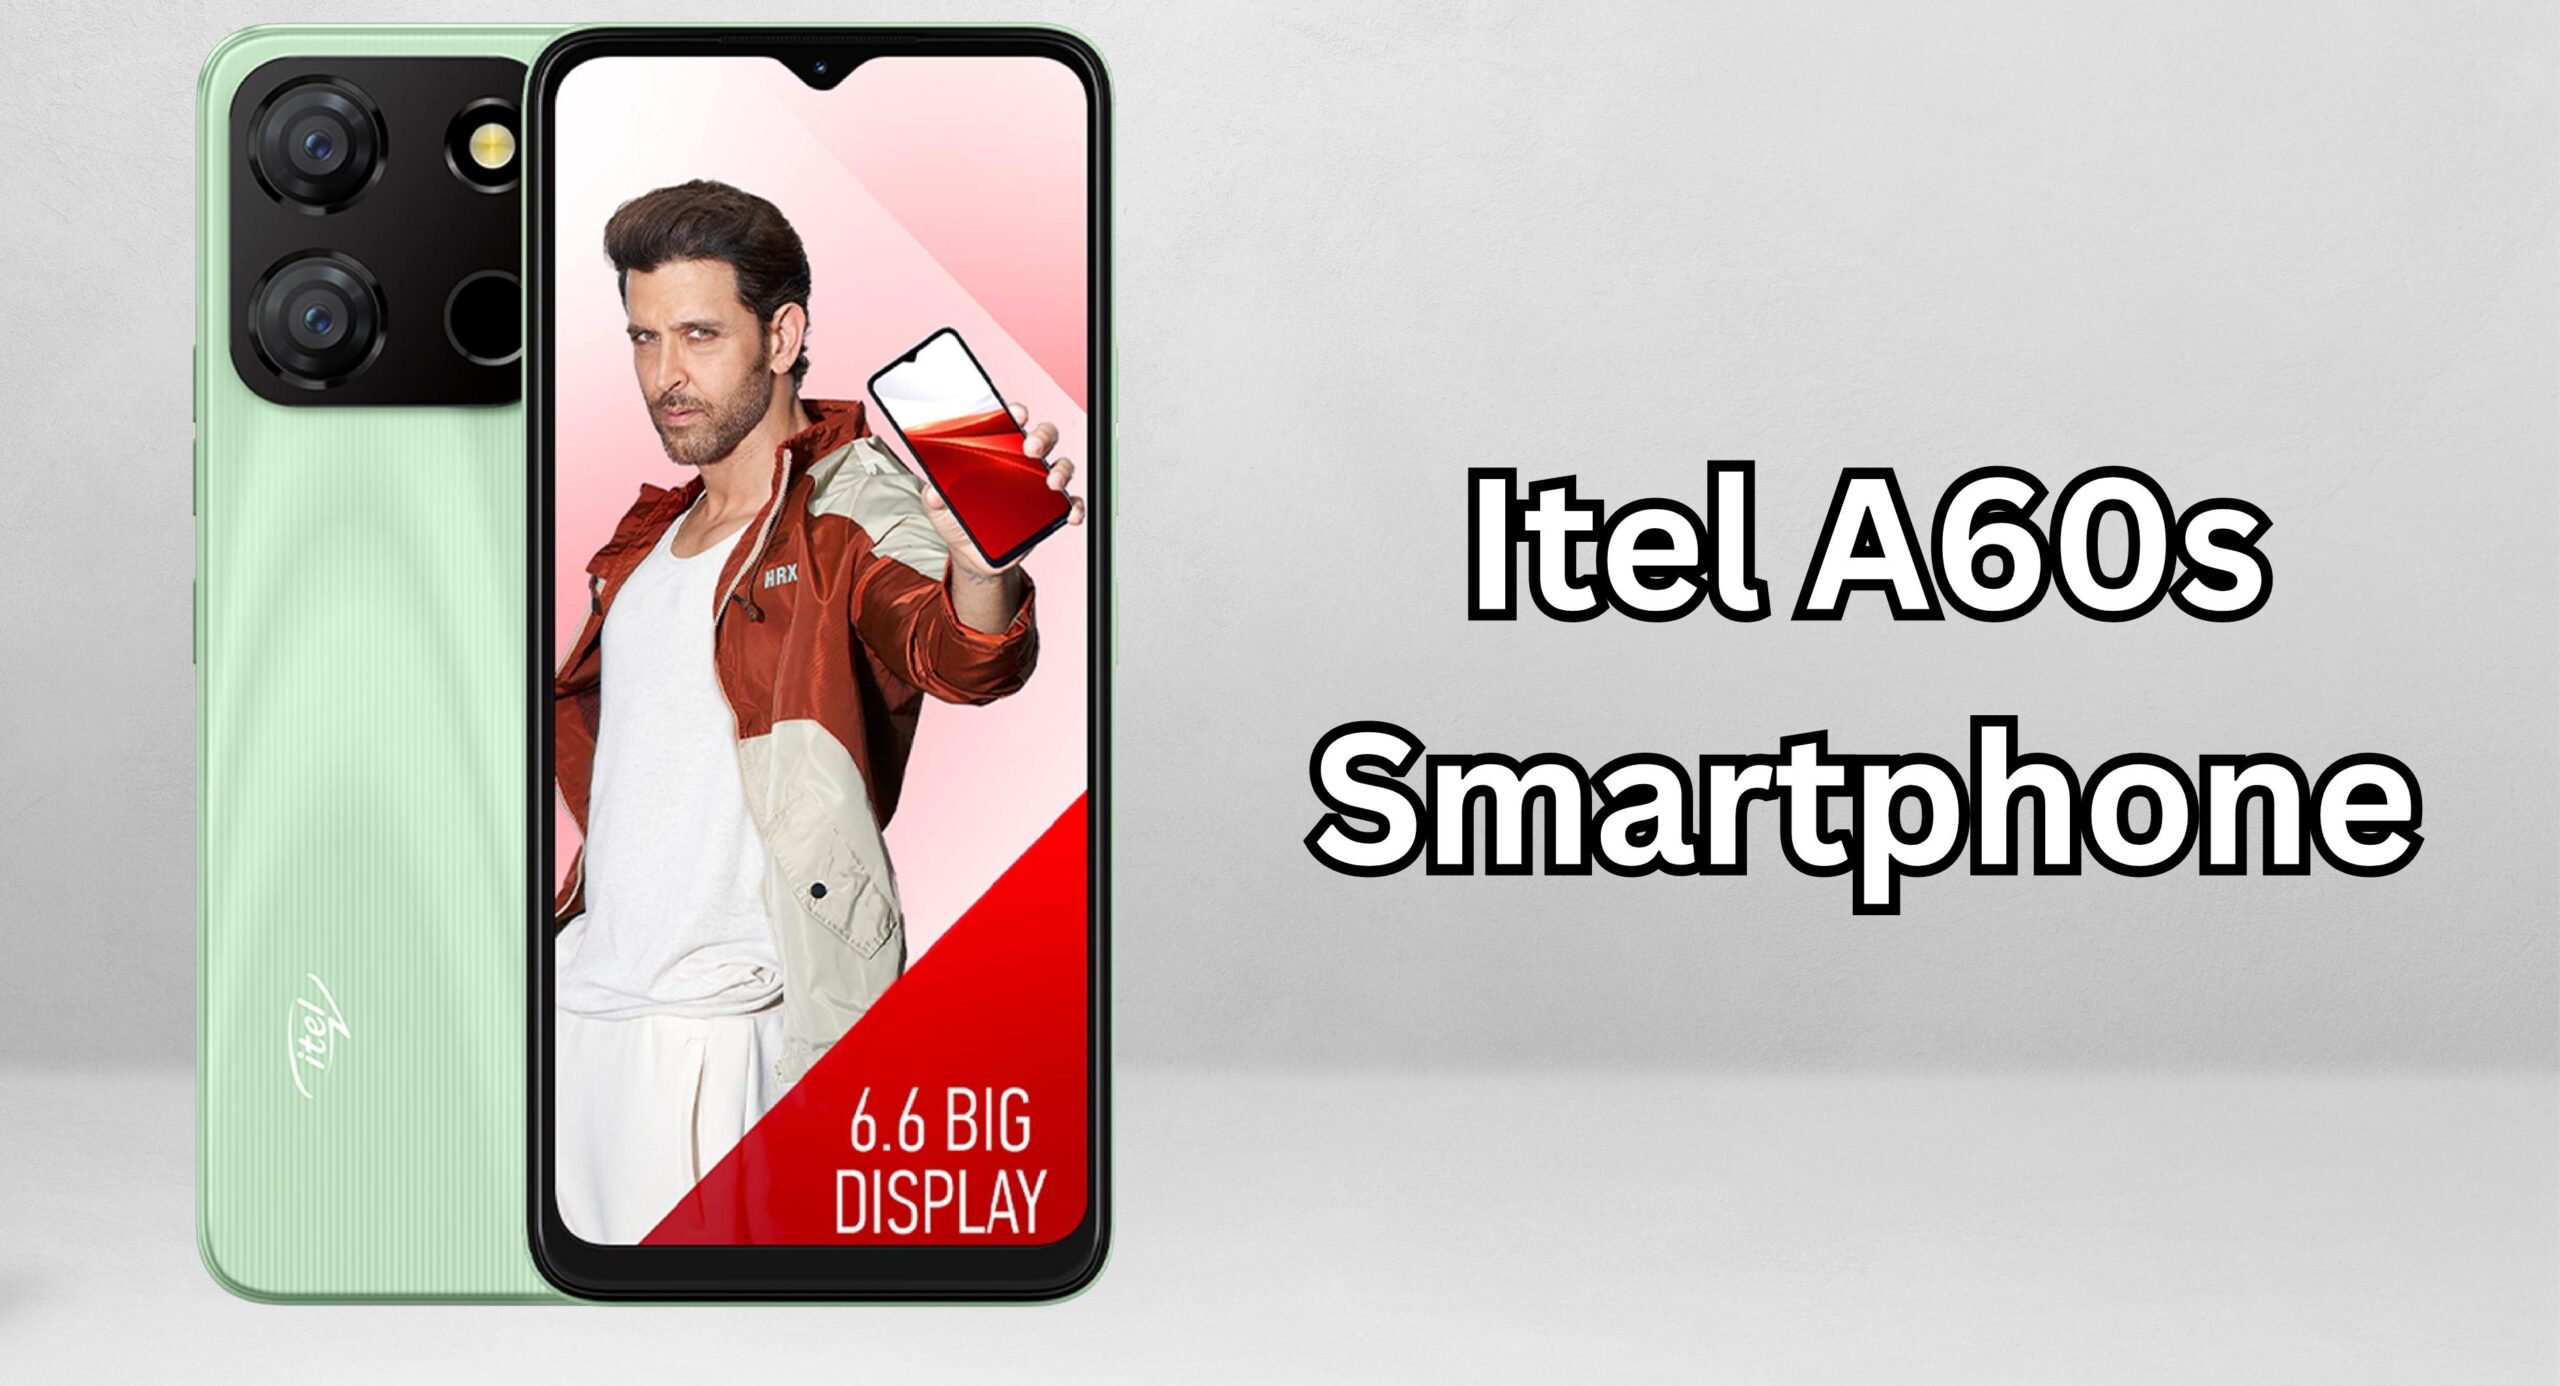 Upcoming Cheapest Smartphone Itel A60s